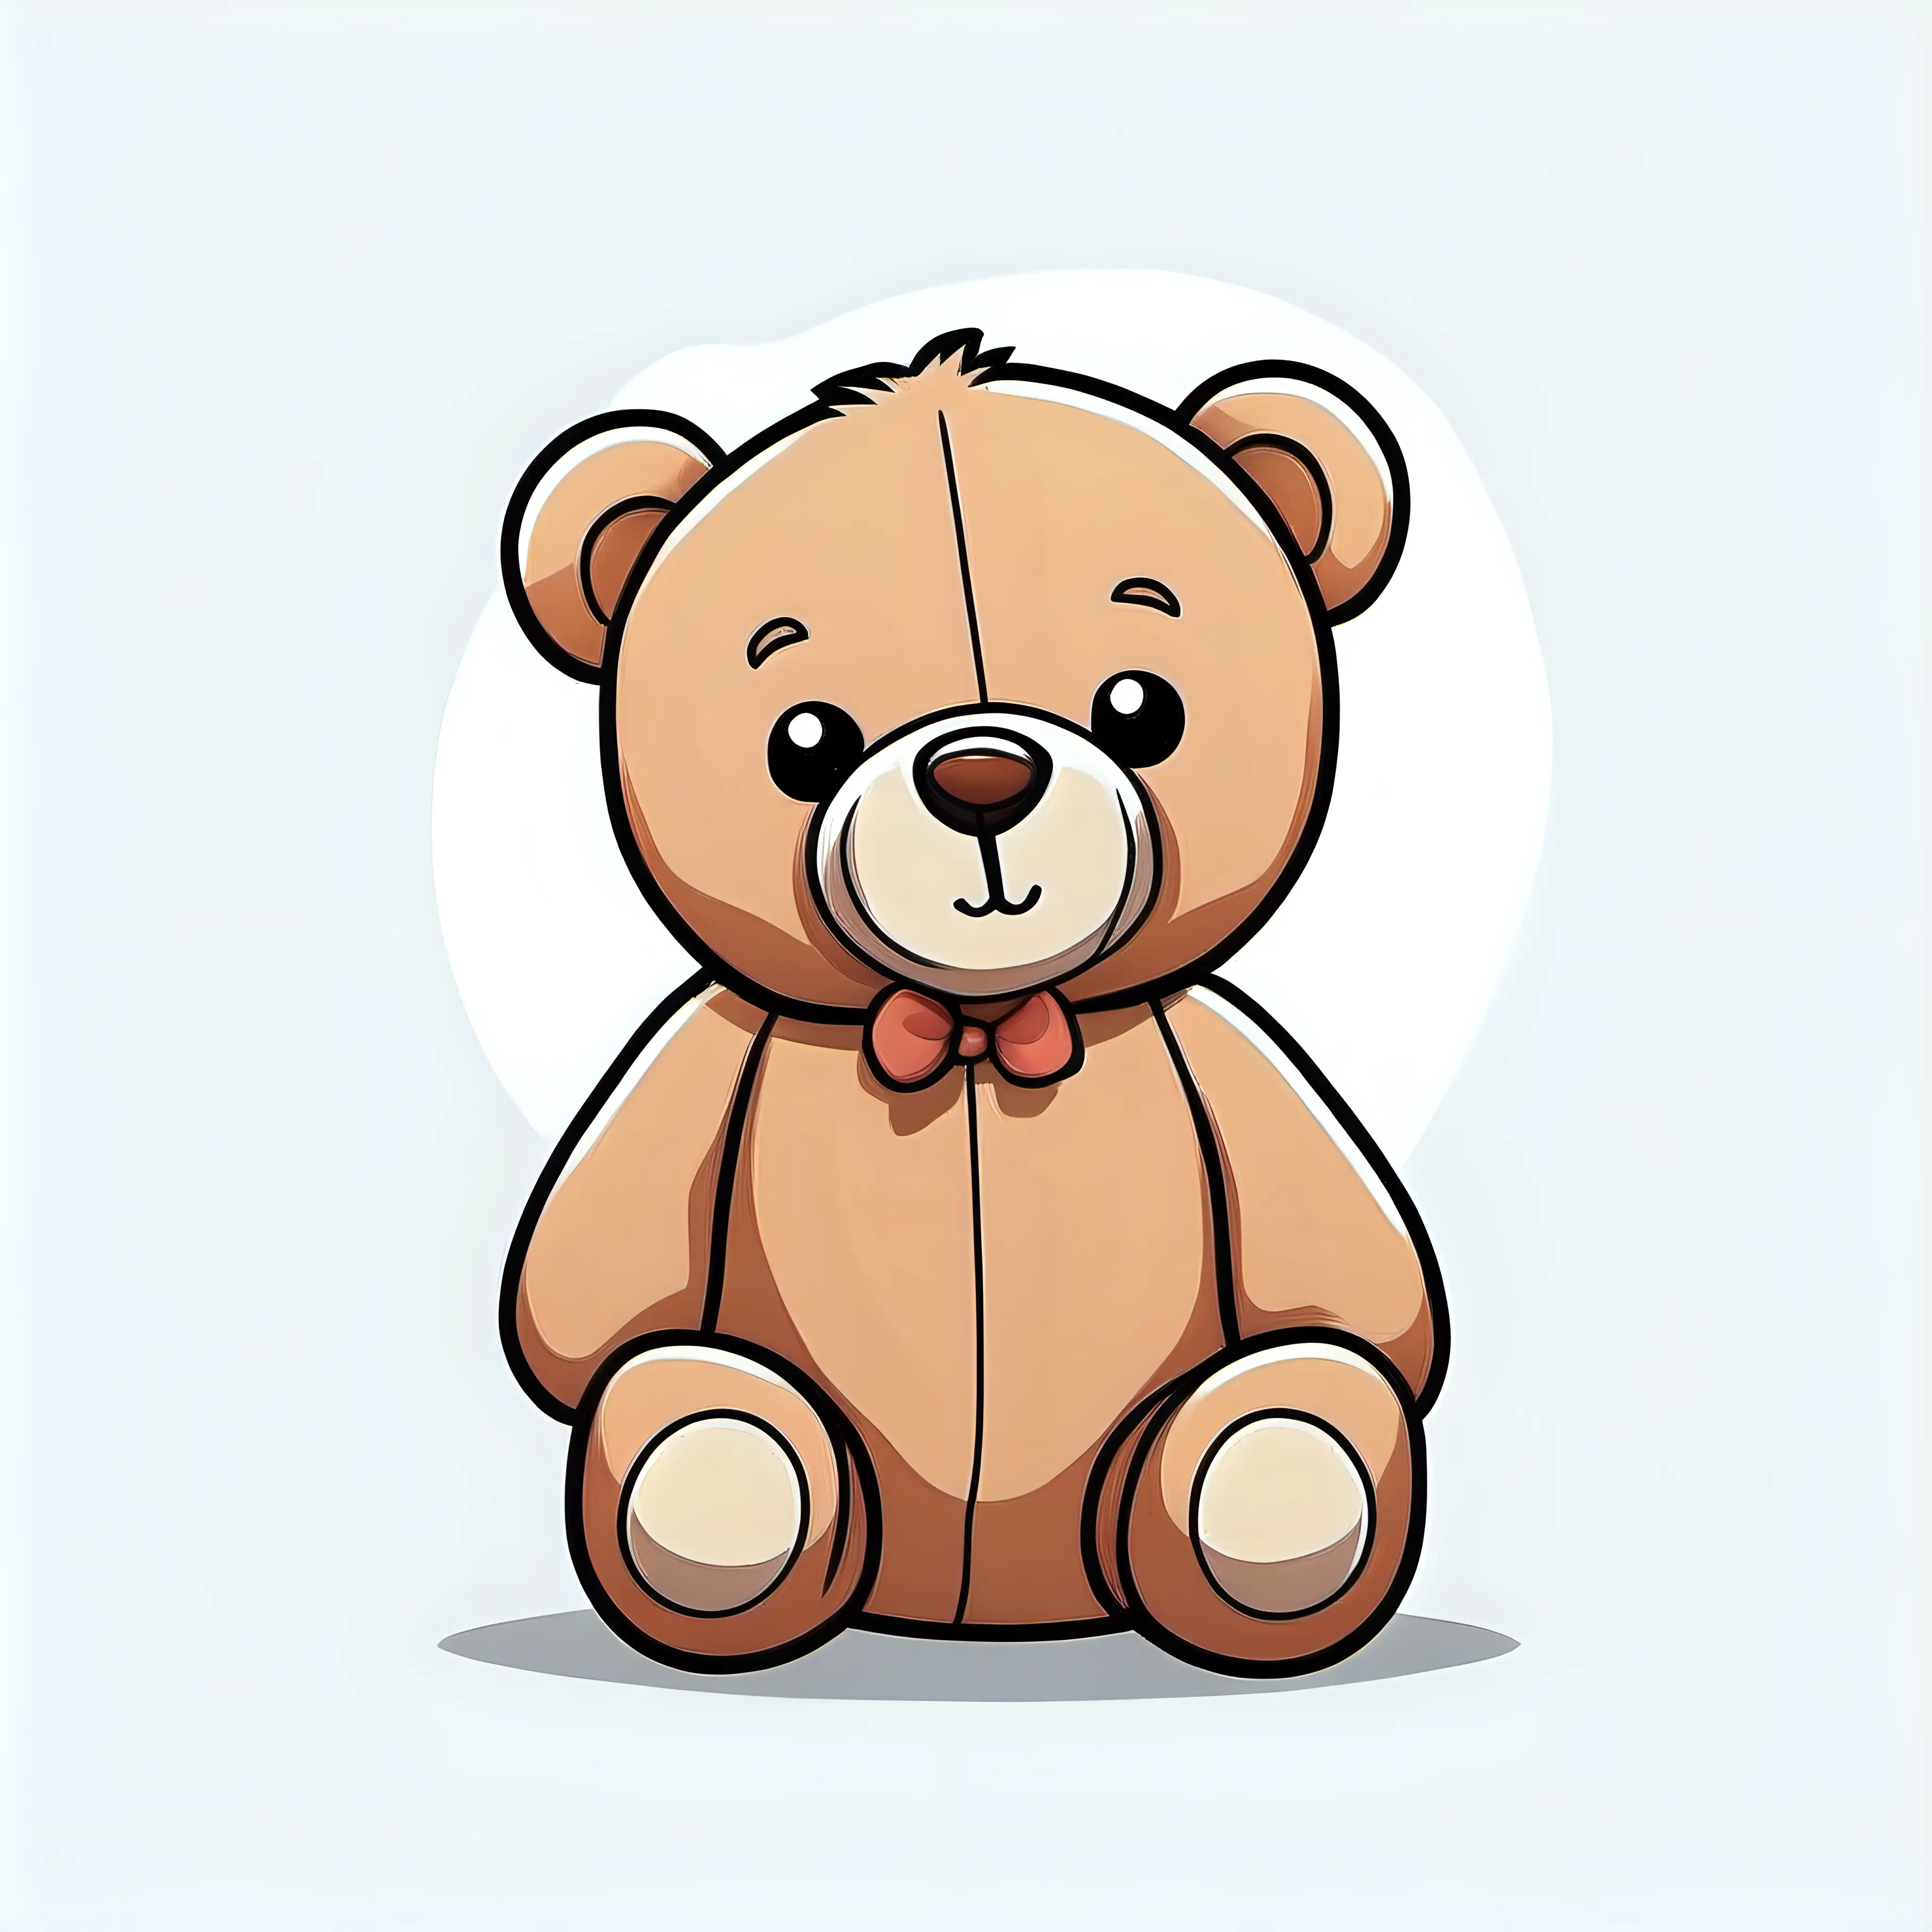 Adorable Cartoon Teddy Bear with Heavy Outline on Aesthetic White Background